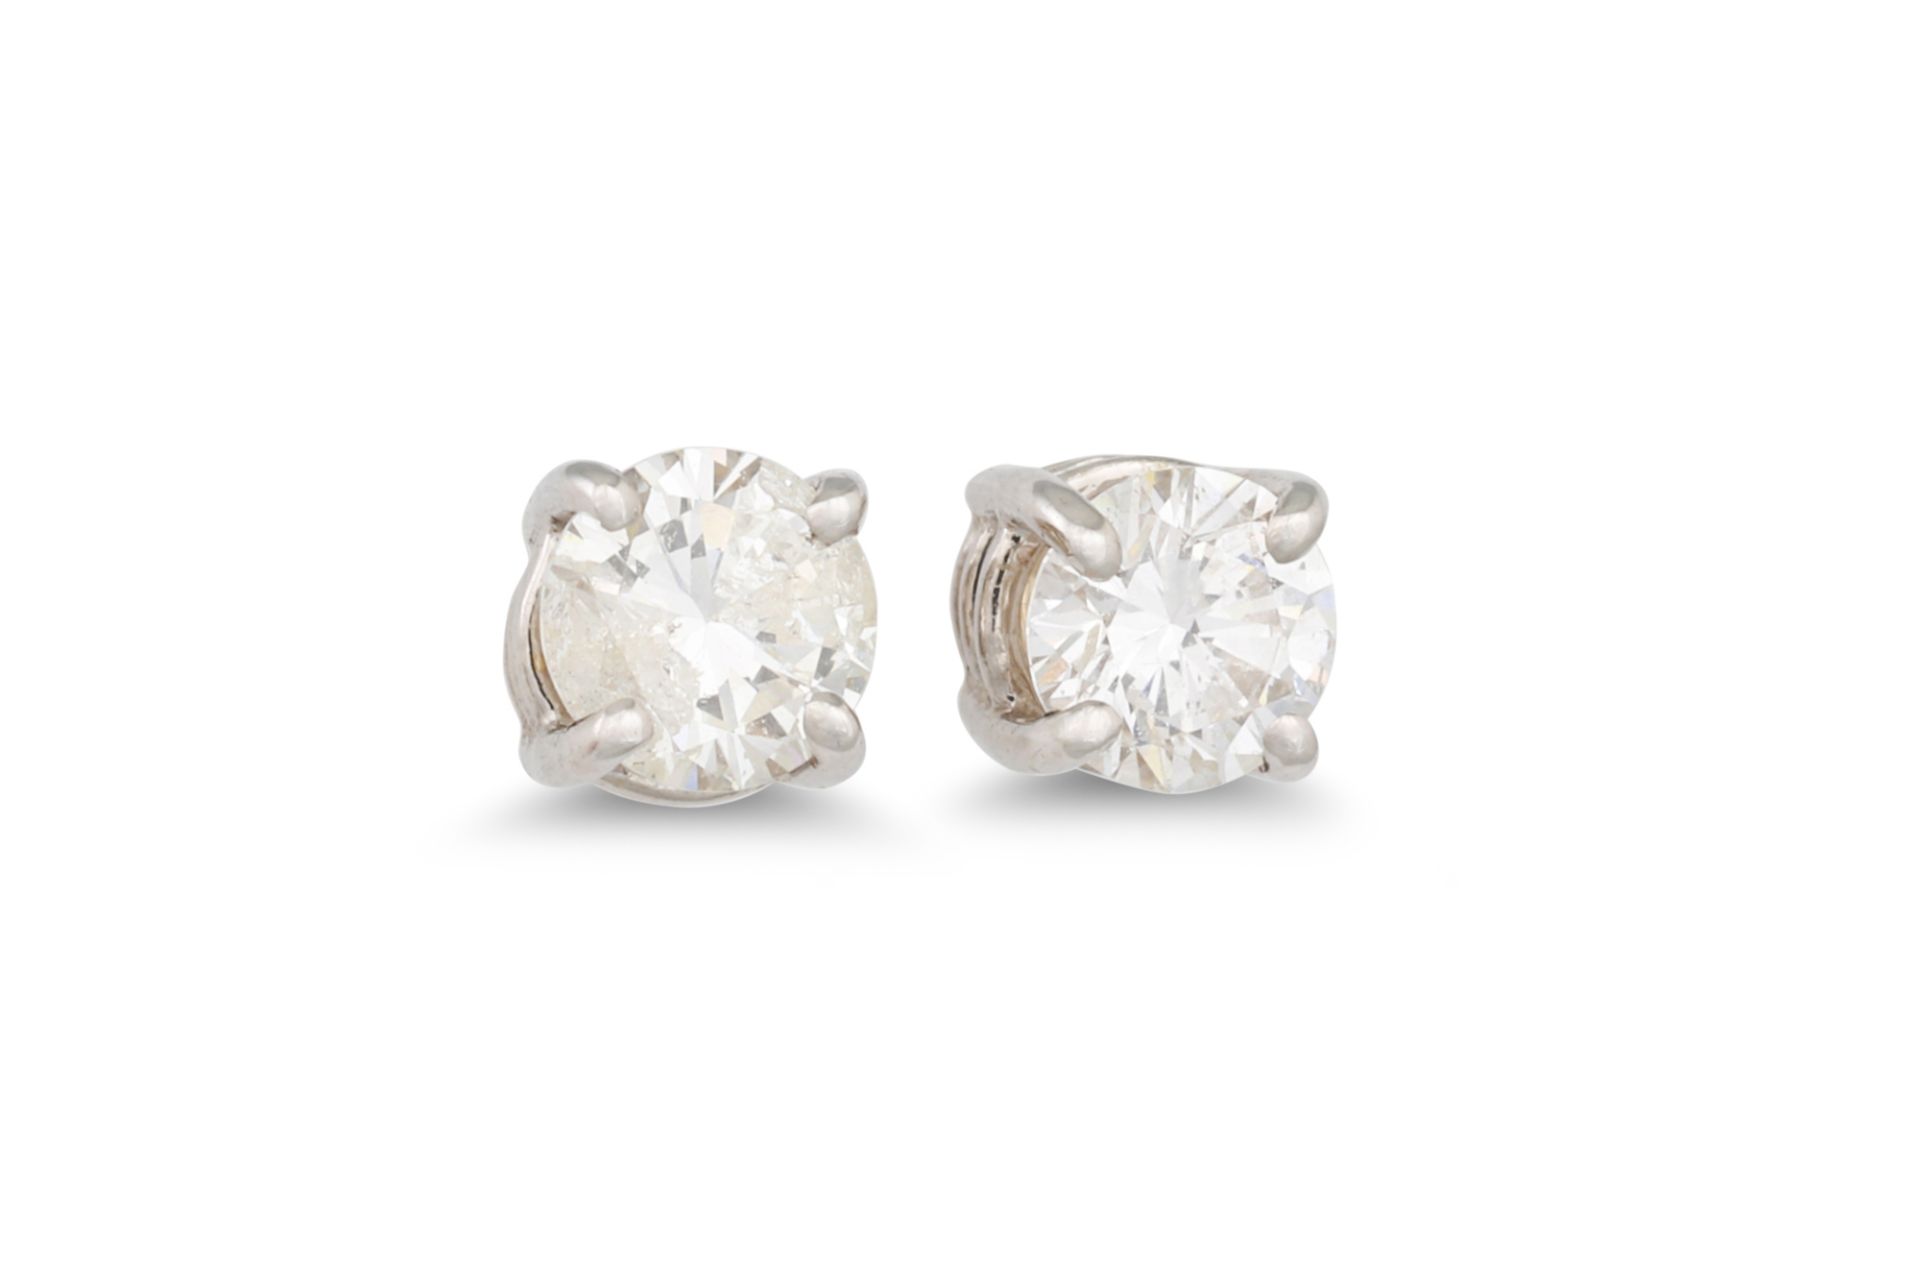 A PAIR OF DIAMOND STUD EARRINGS, mounted in white gold. Estimated: weight of diamonds: 0.40 ct.